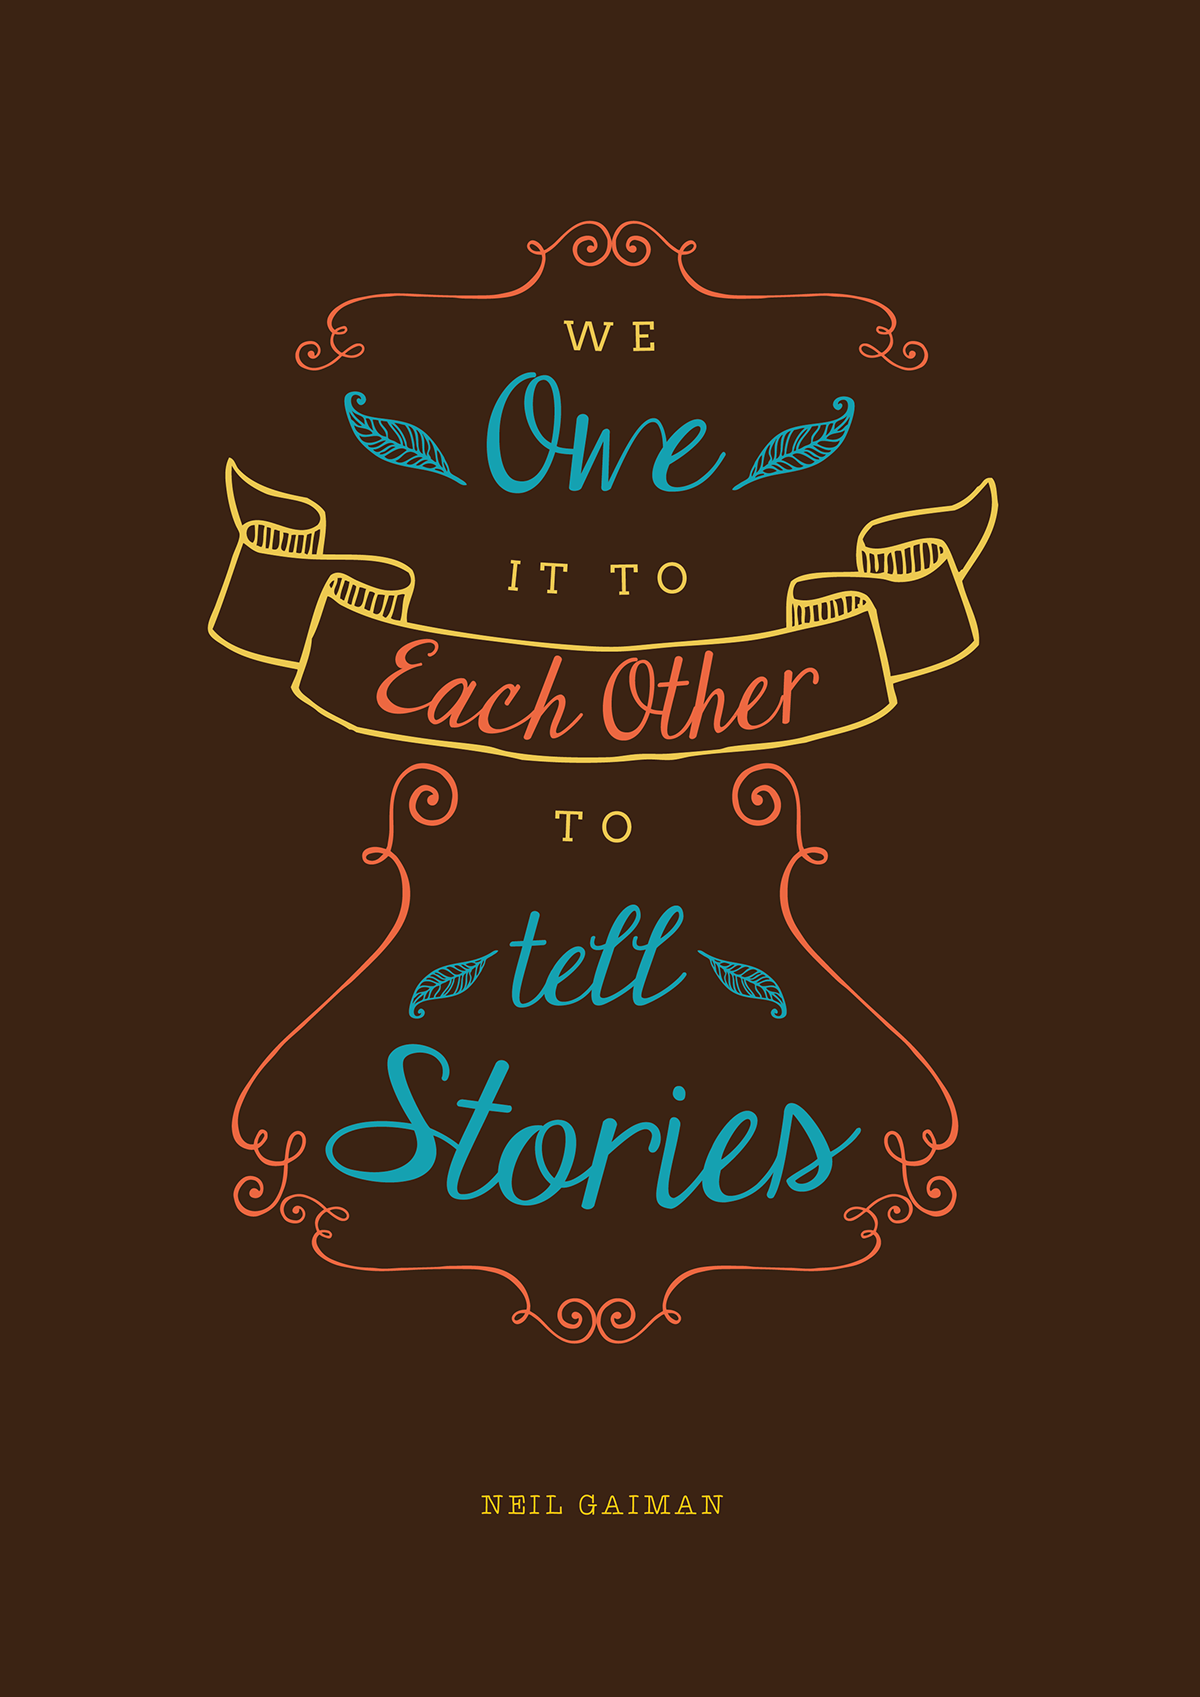 neil gaiman Author writer quote type saying words type poster type design literature Colourful  fonts Illustrator